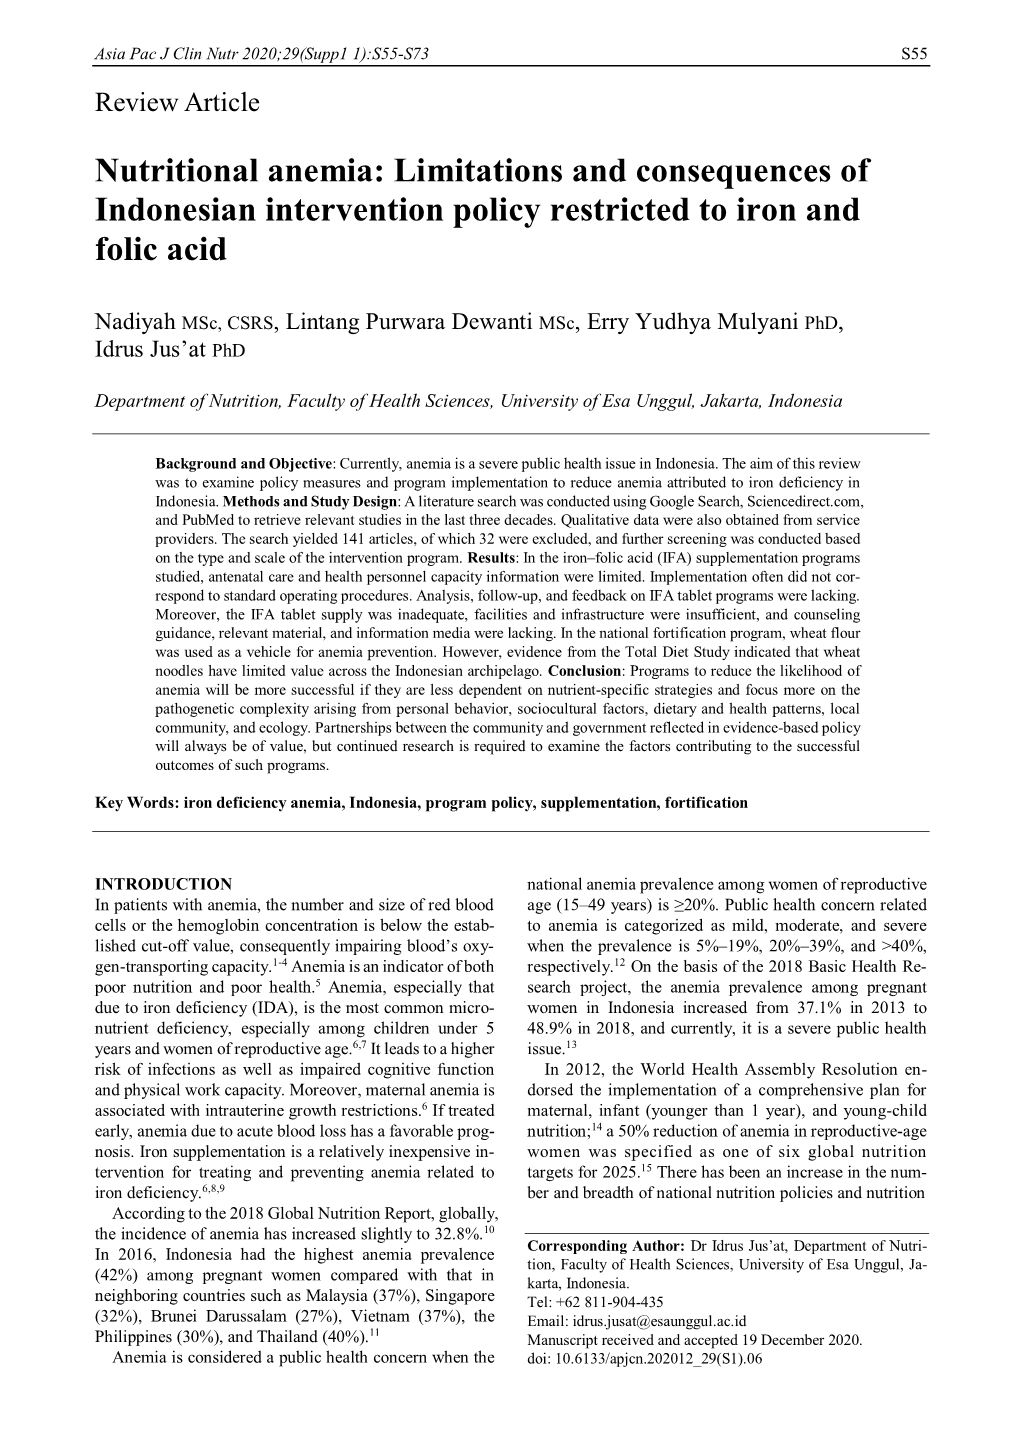 Nutritional Anemia: Limitations and Consequences of Indonesian Intervention Policy Restricted to Iron and Folic Acid